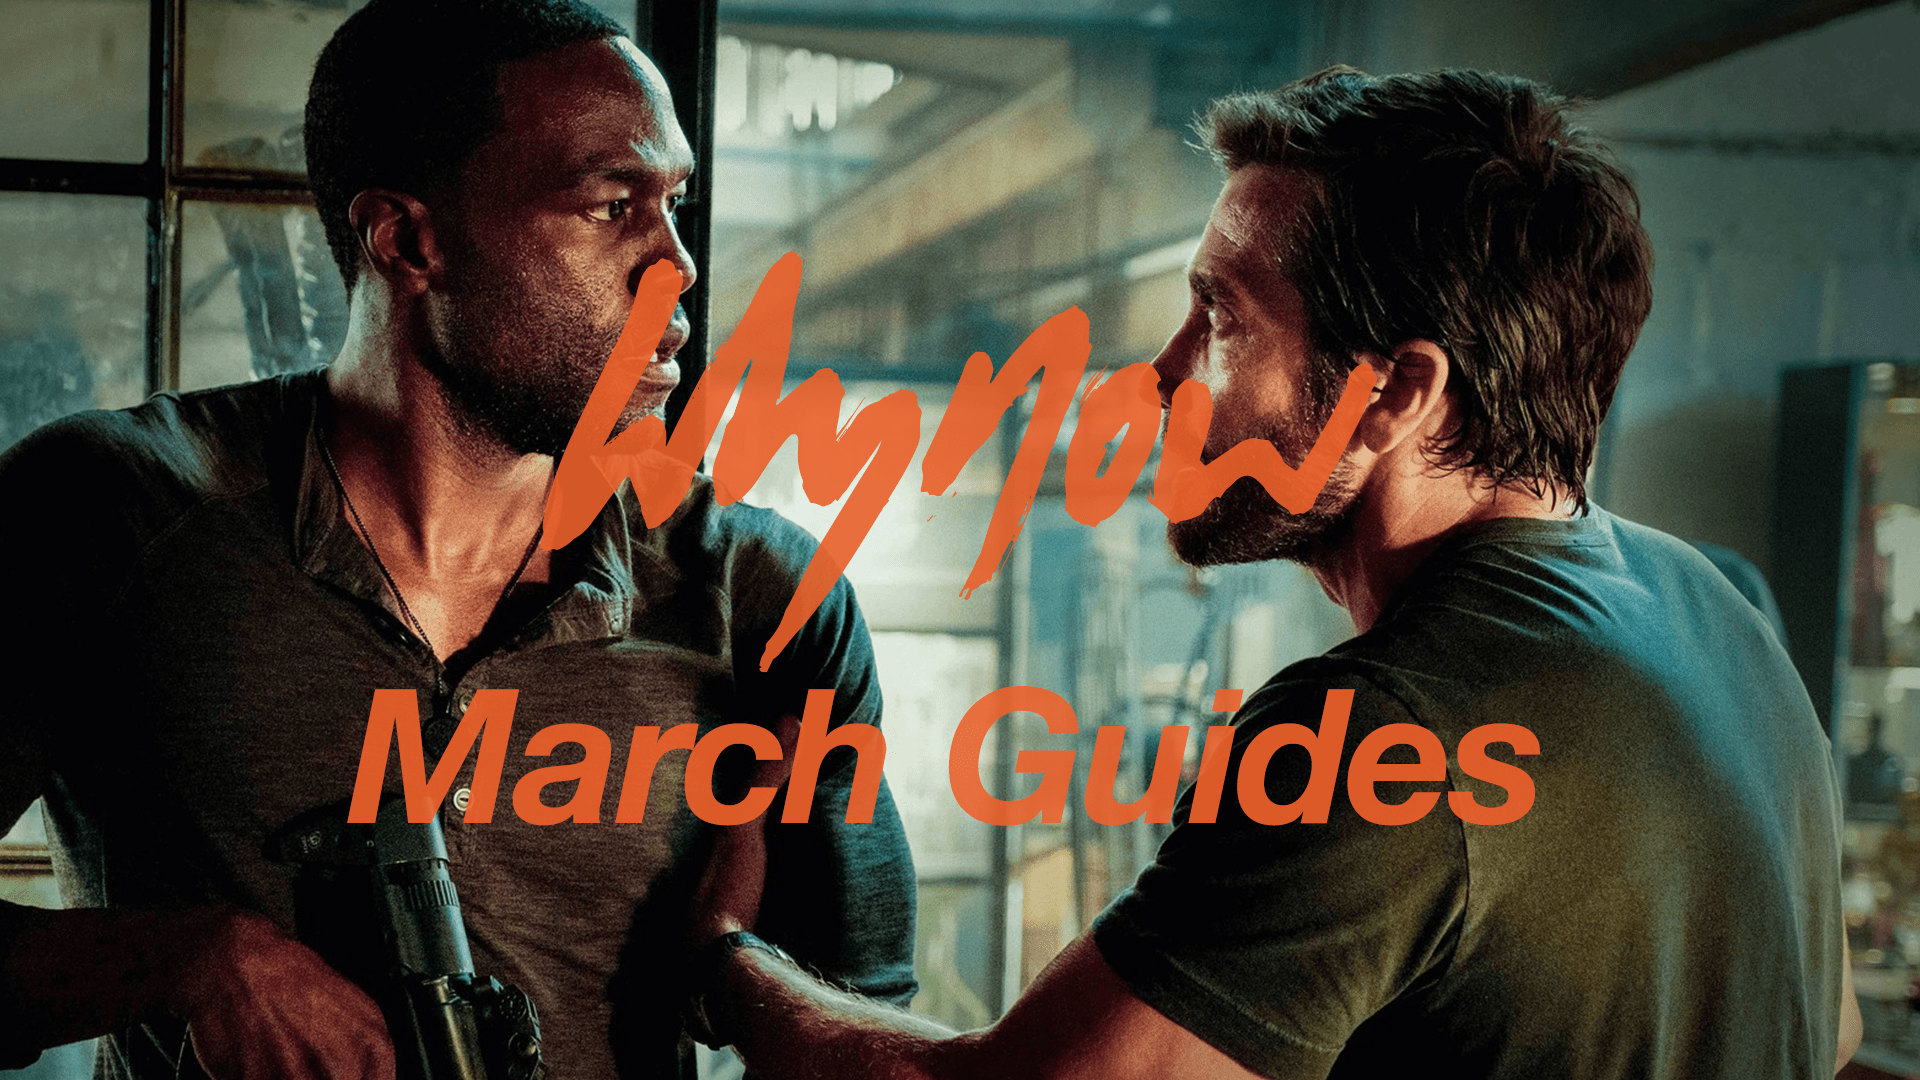 Whynow march guides